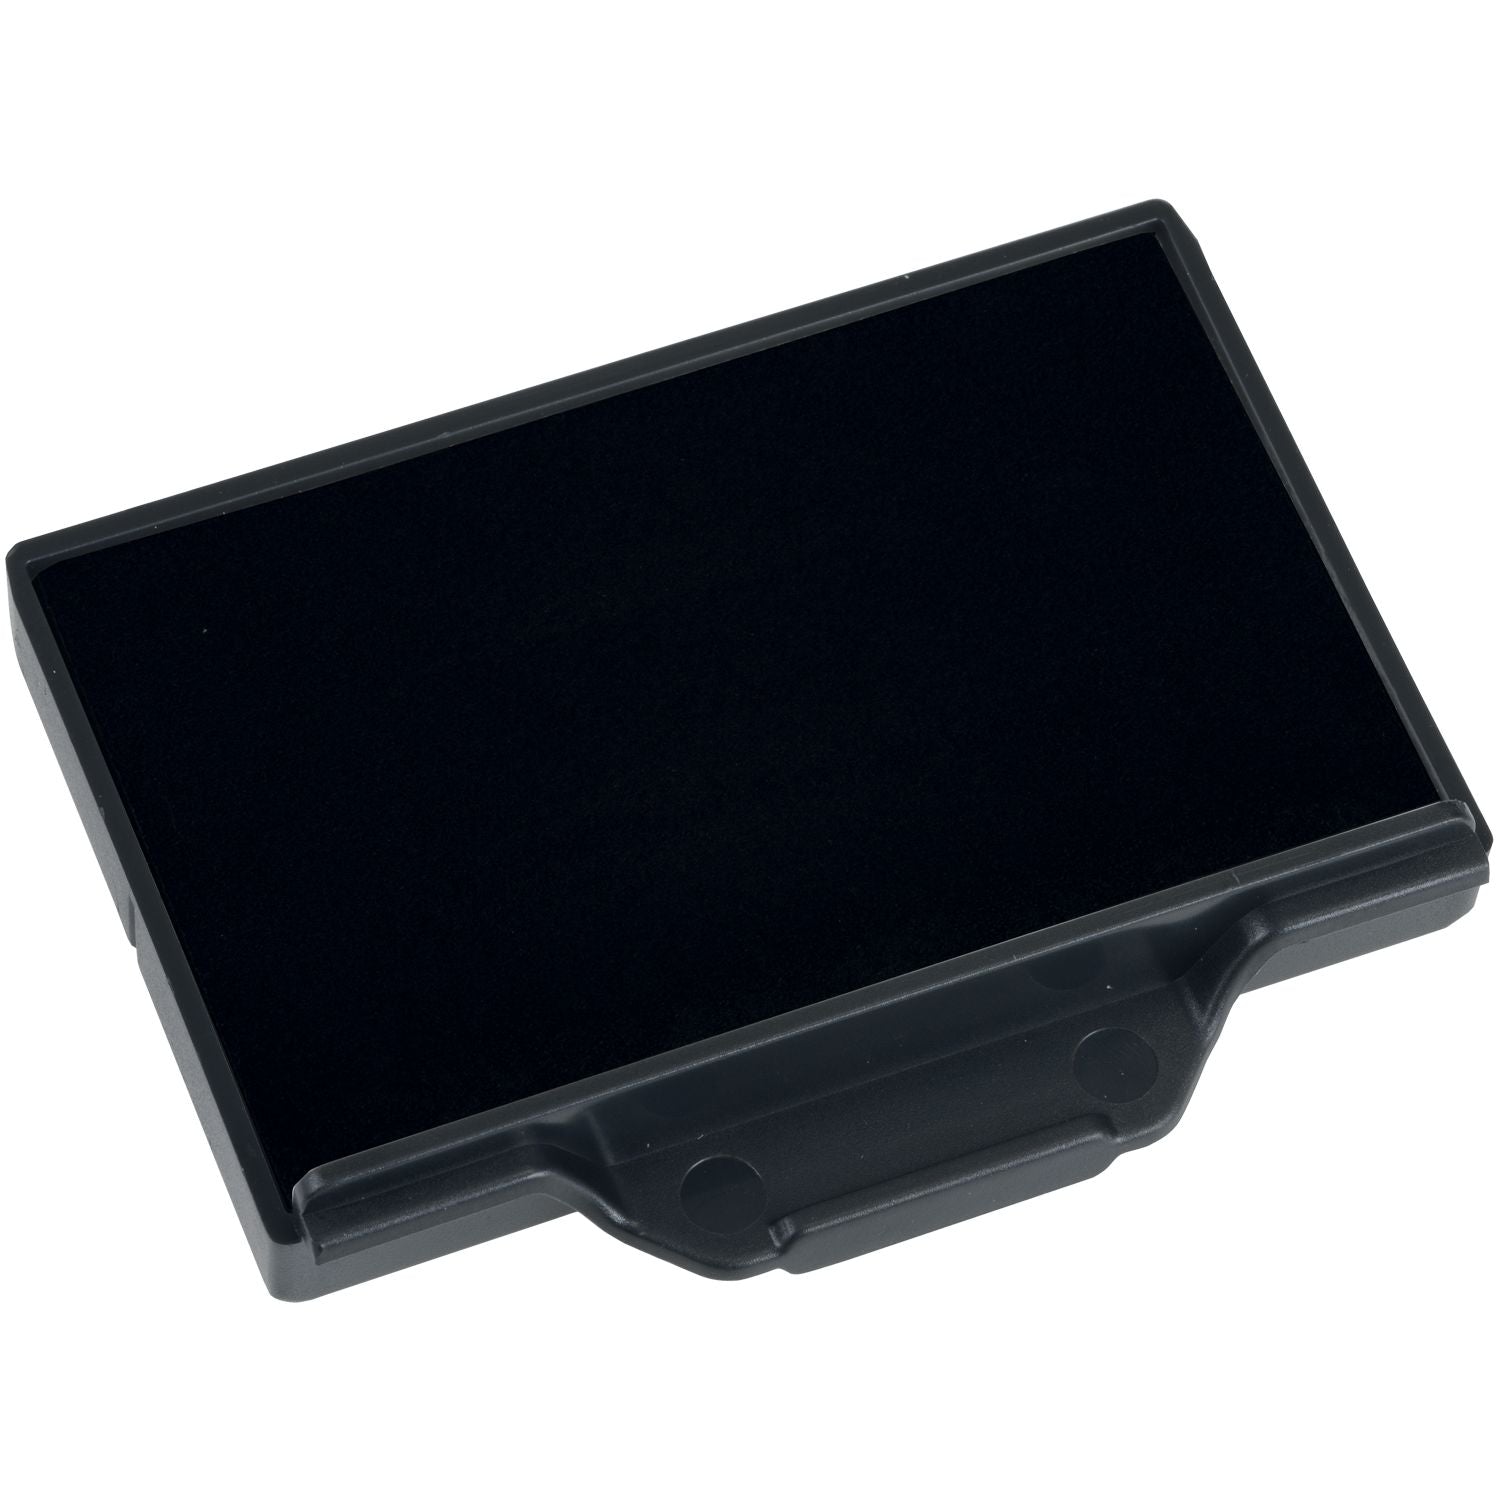 Ink Pad for Trodat 4926 - Self-Inking Stamp Pad - Simply Stamps